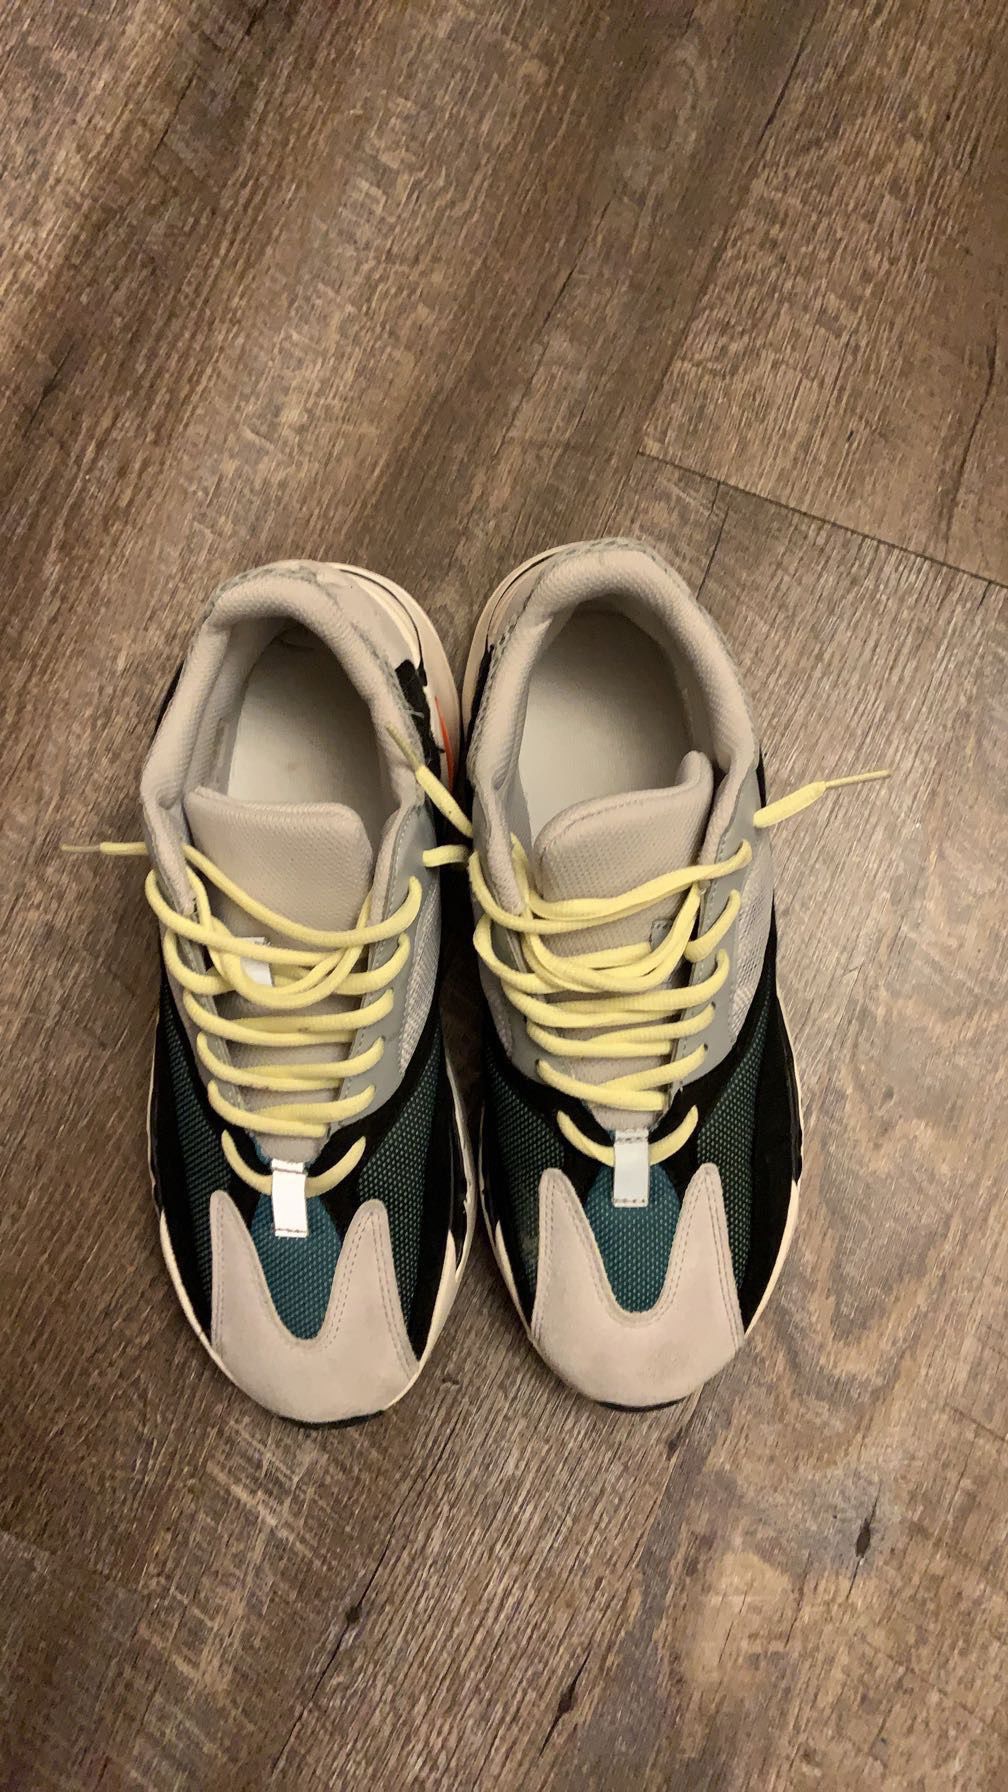 Adidas Yeezy Boost 700 (wave runners) Size 11